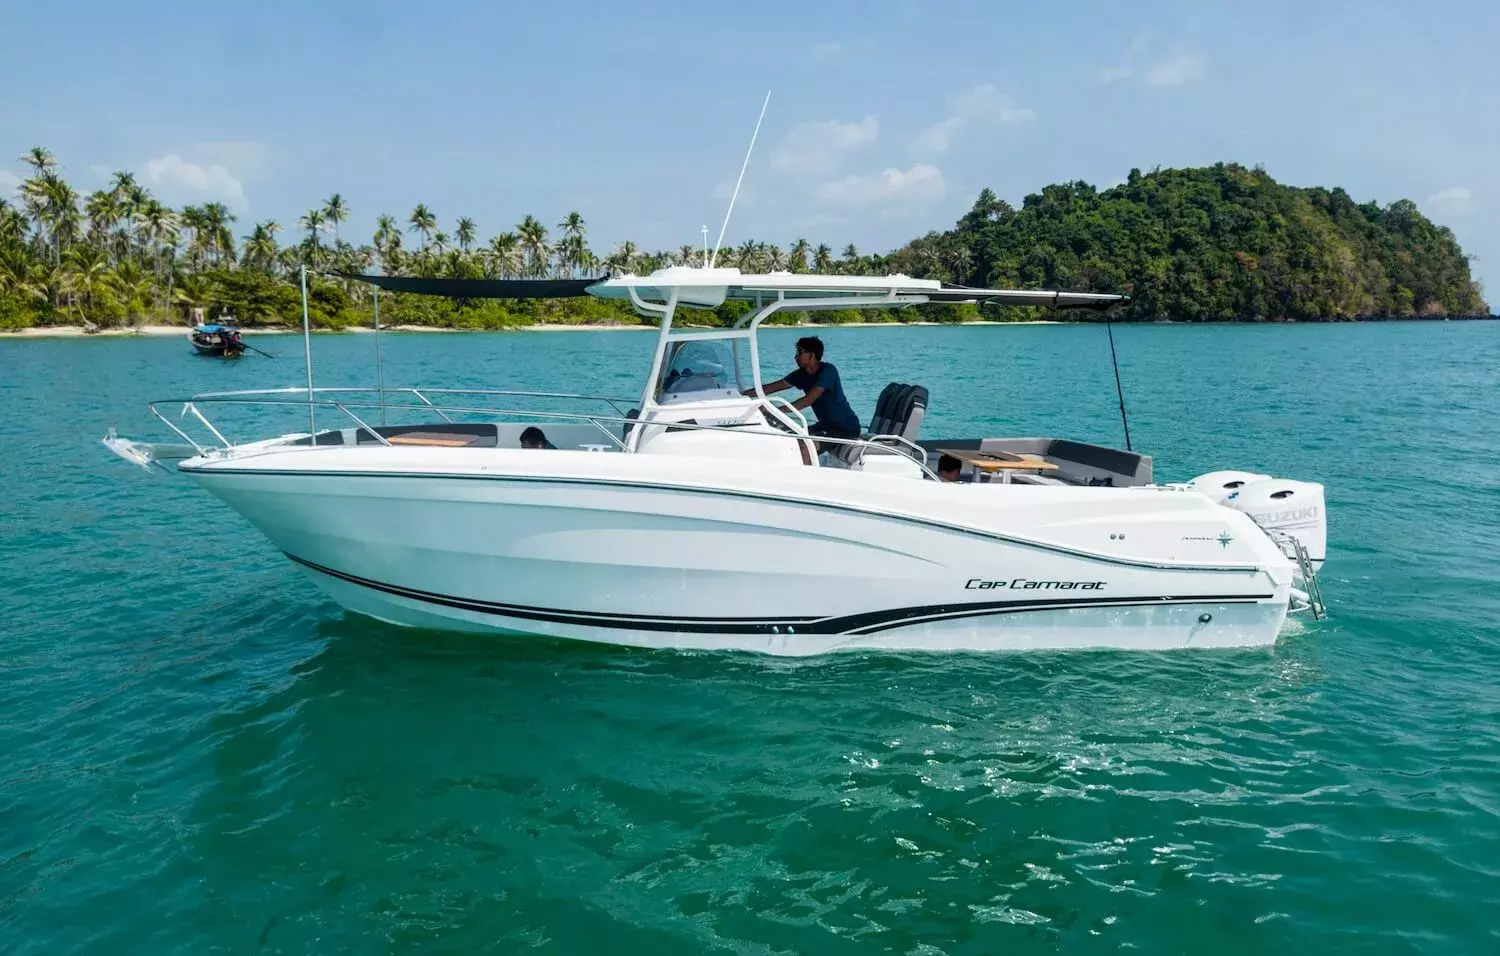 Na-O by Jeanneau - Top rates for a Charter of a private Power Boat in Thailand